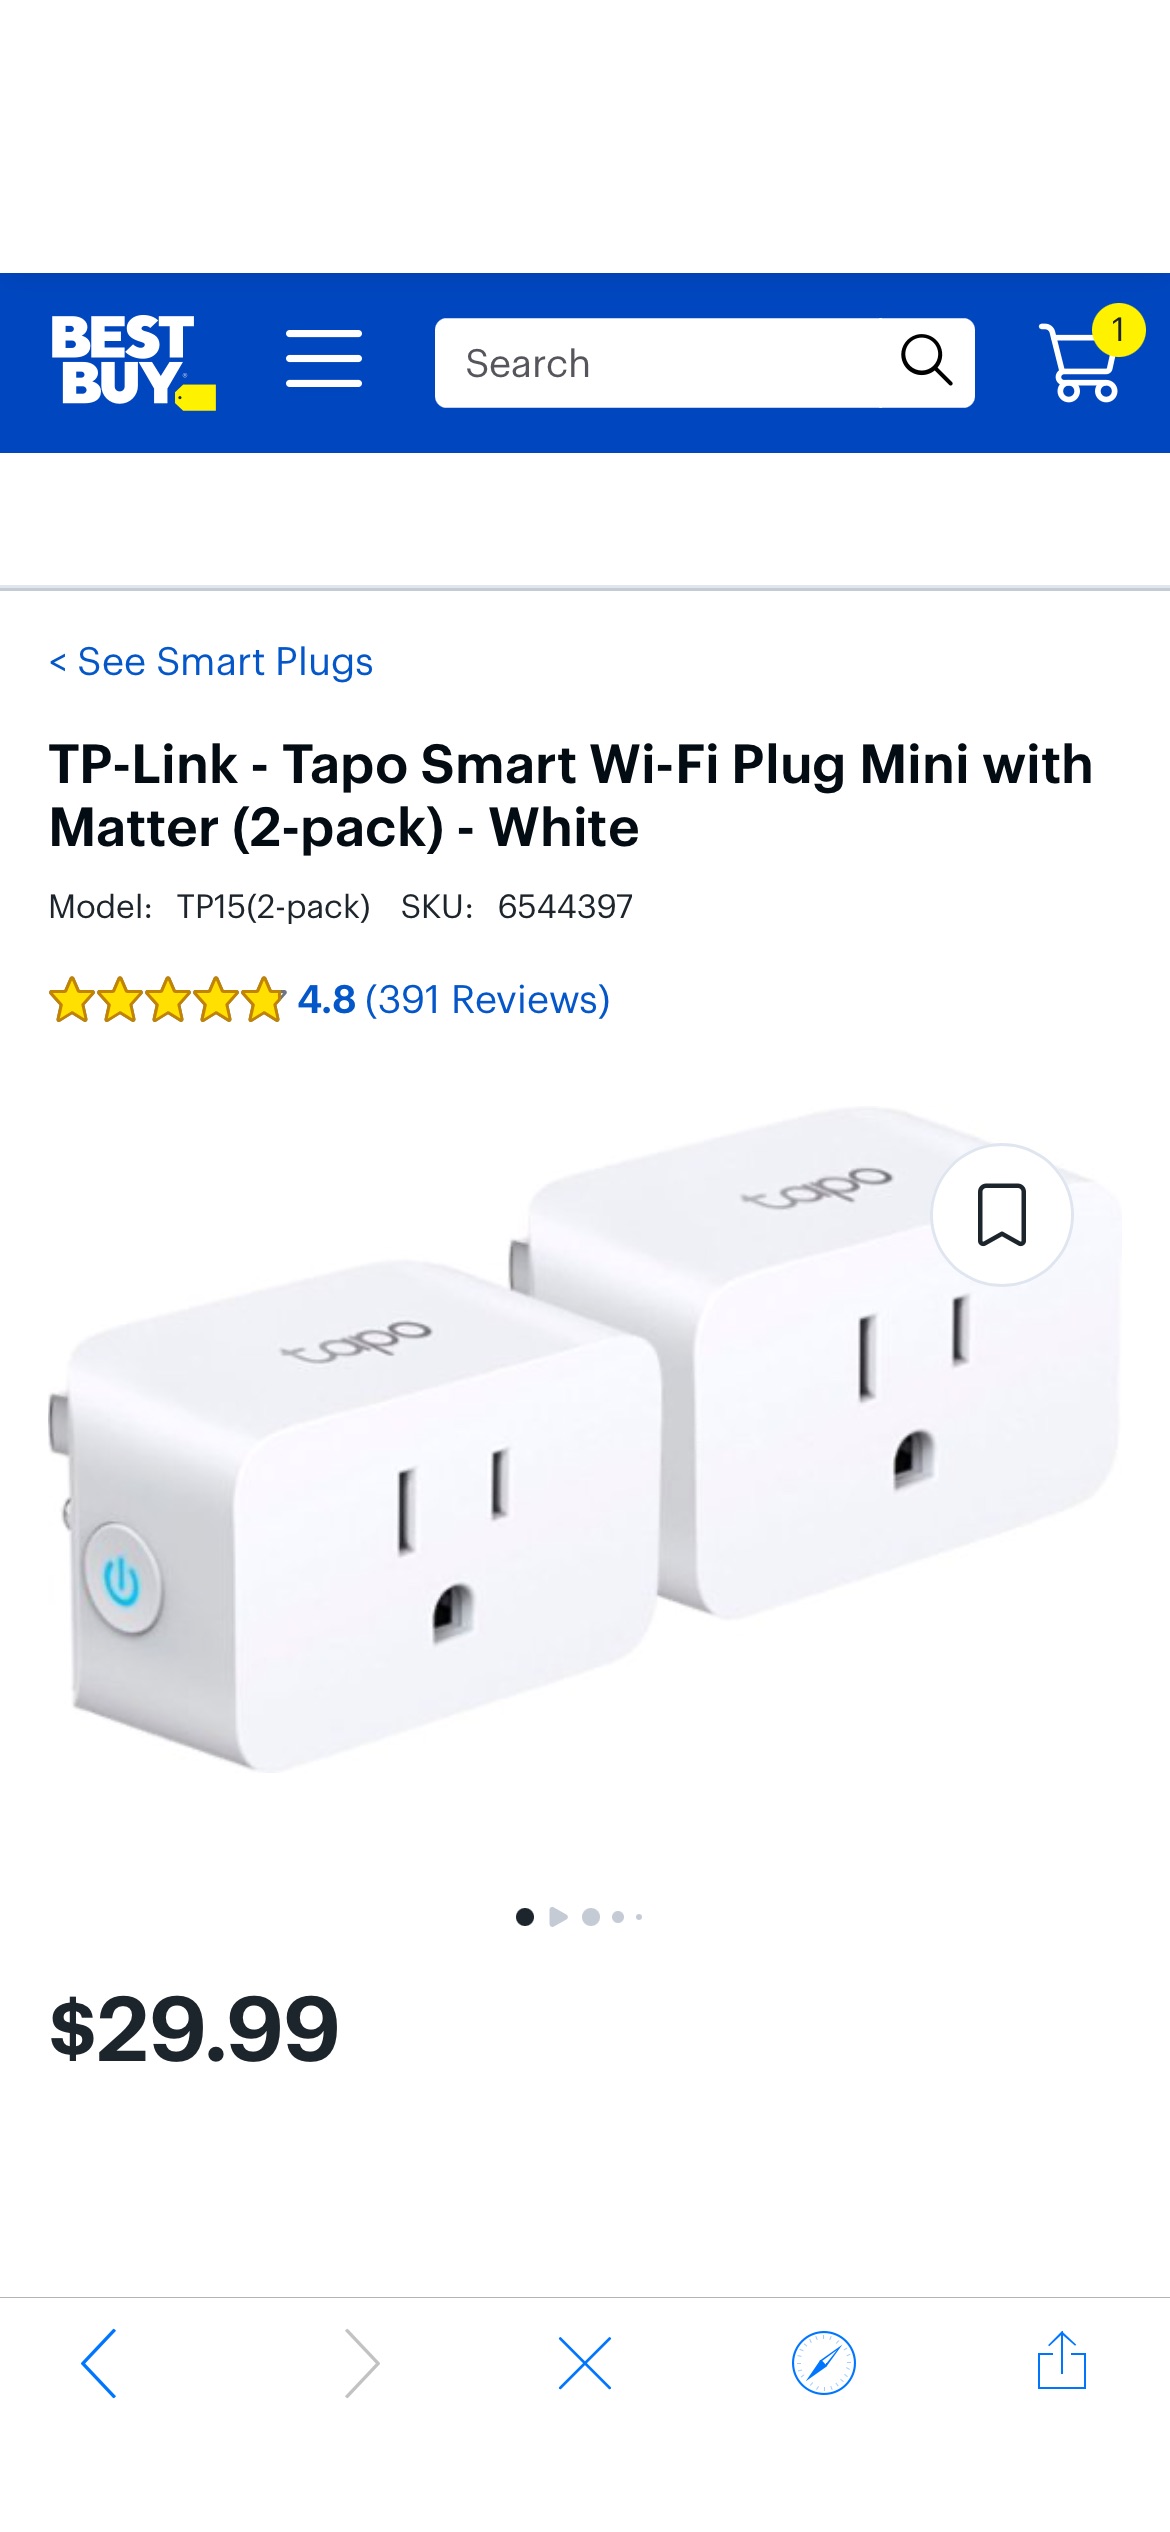 TP-Link Tapo Smart Wi-Fi Plug Mini with Matter (2-pack) White TP15(2-pack) - Best Buy